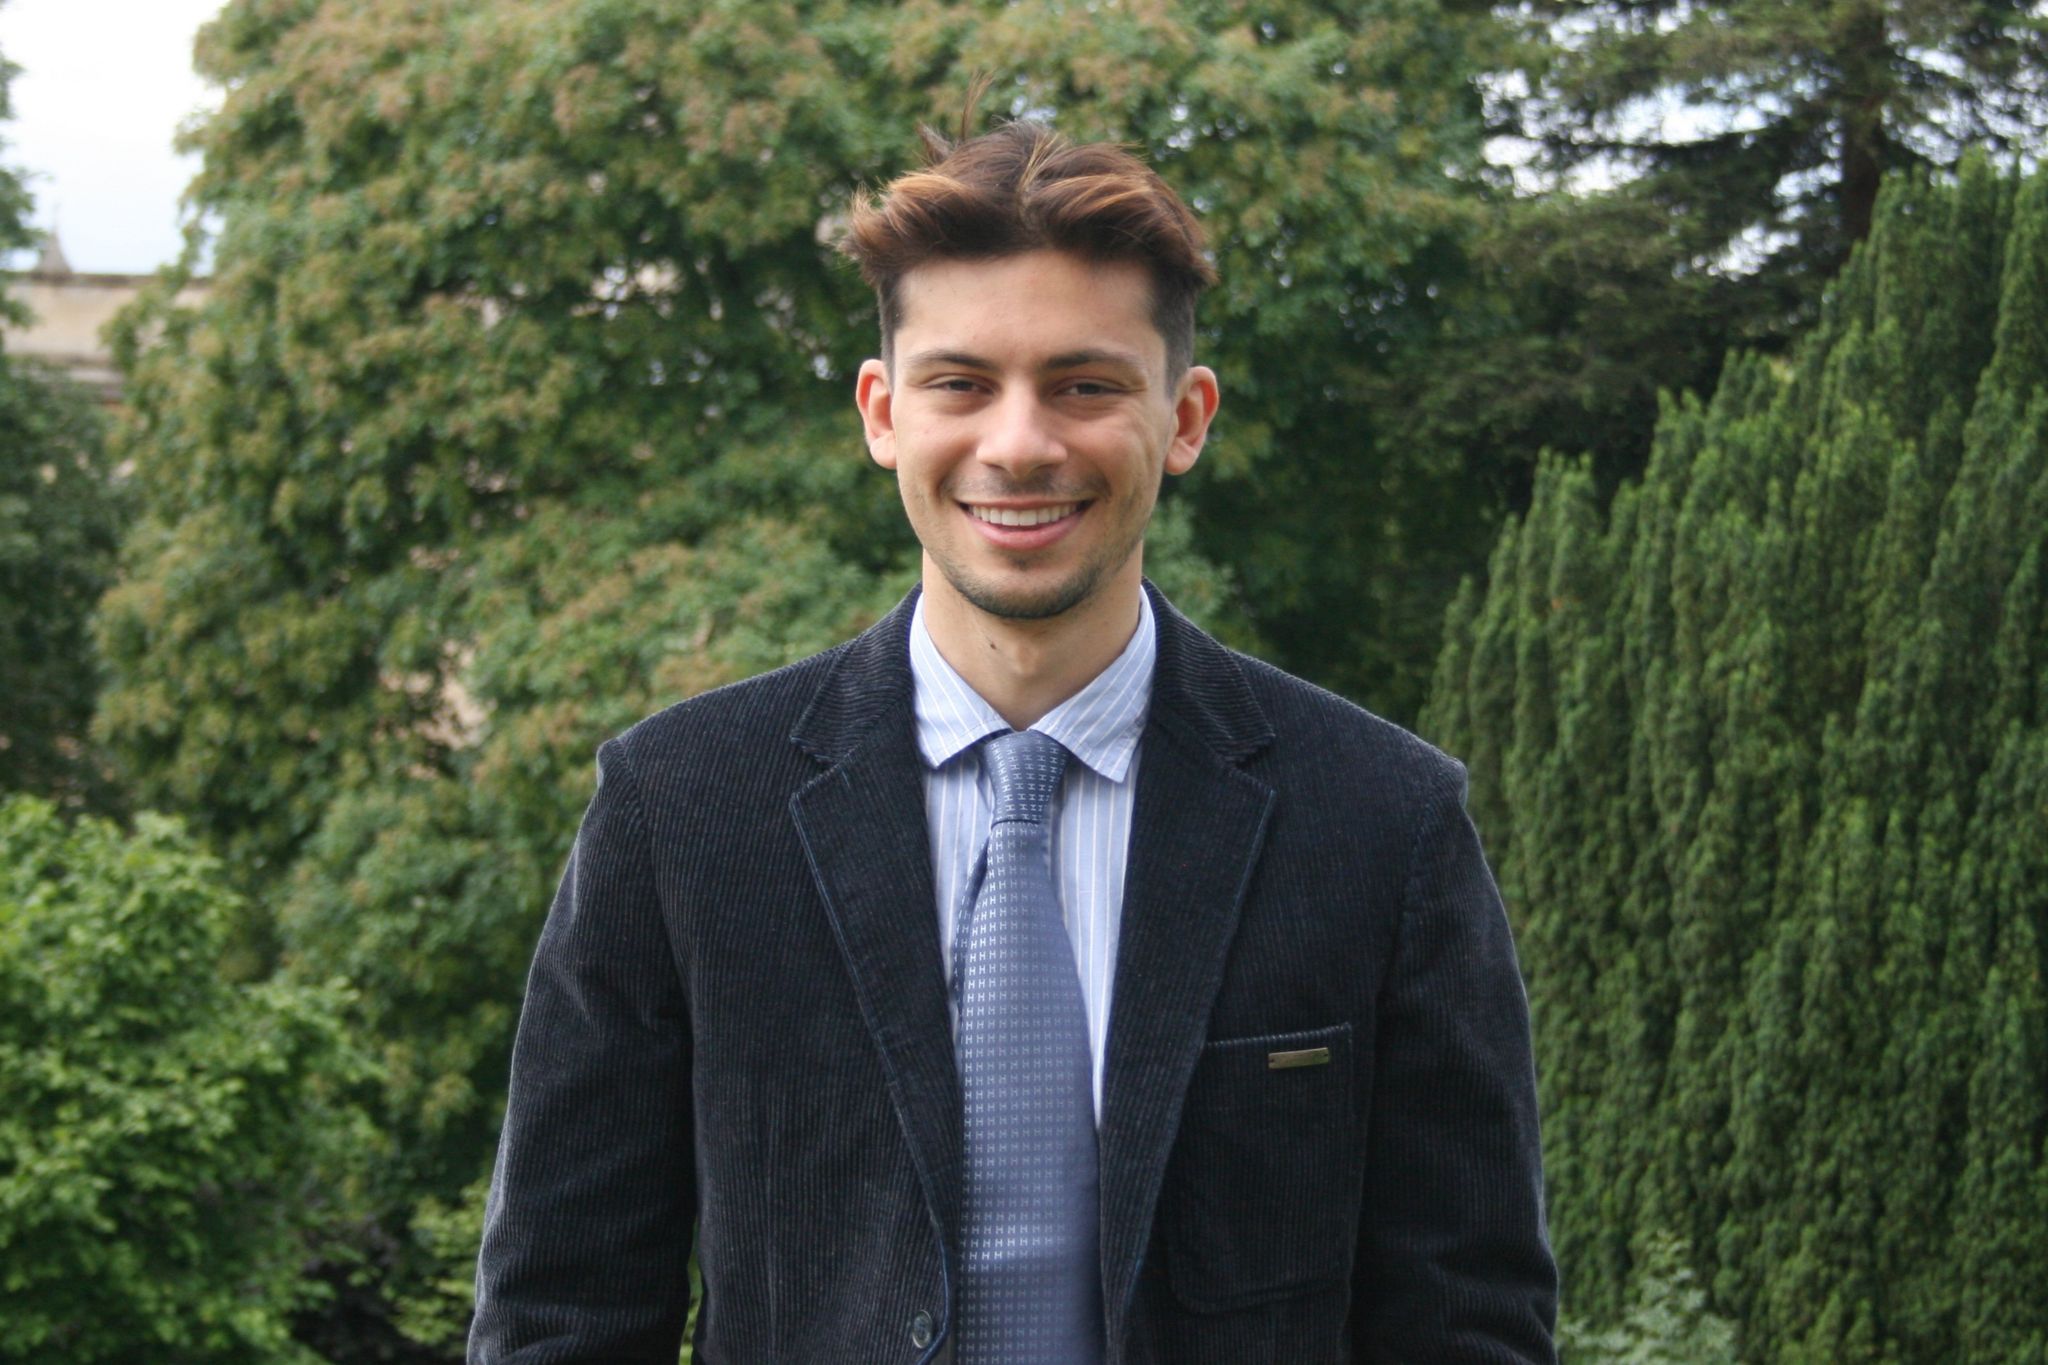 Dr Oscar Oglina, a young man who has now graduated from Bristol Medical School